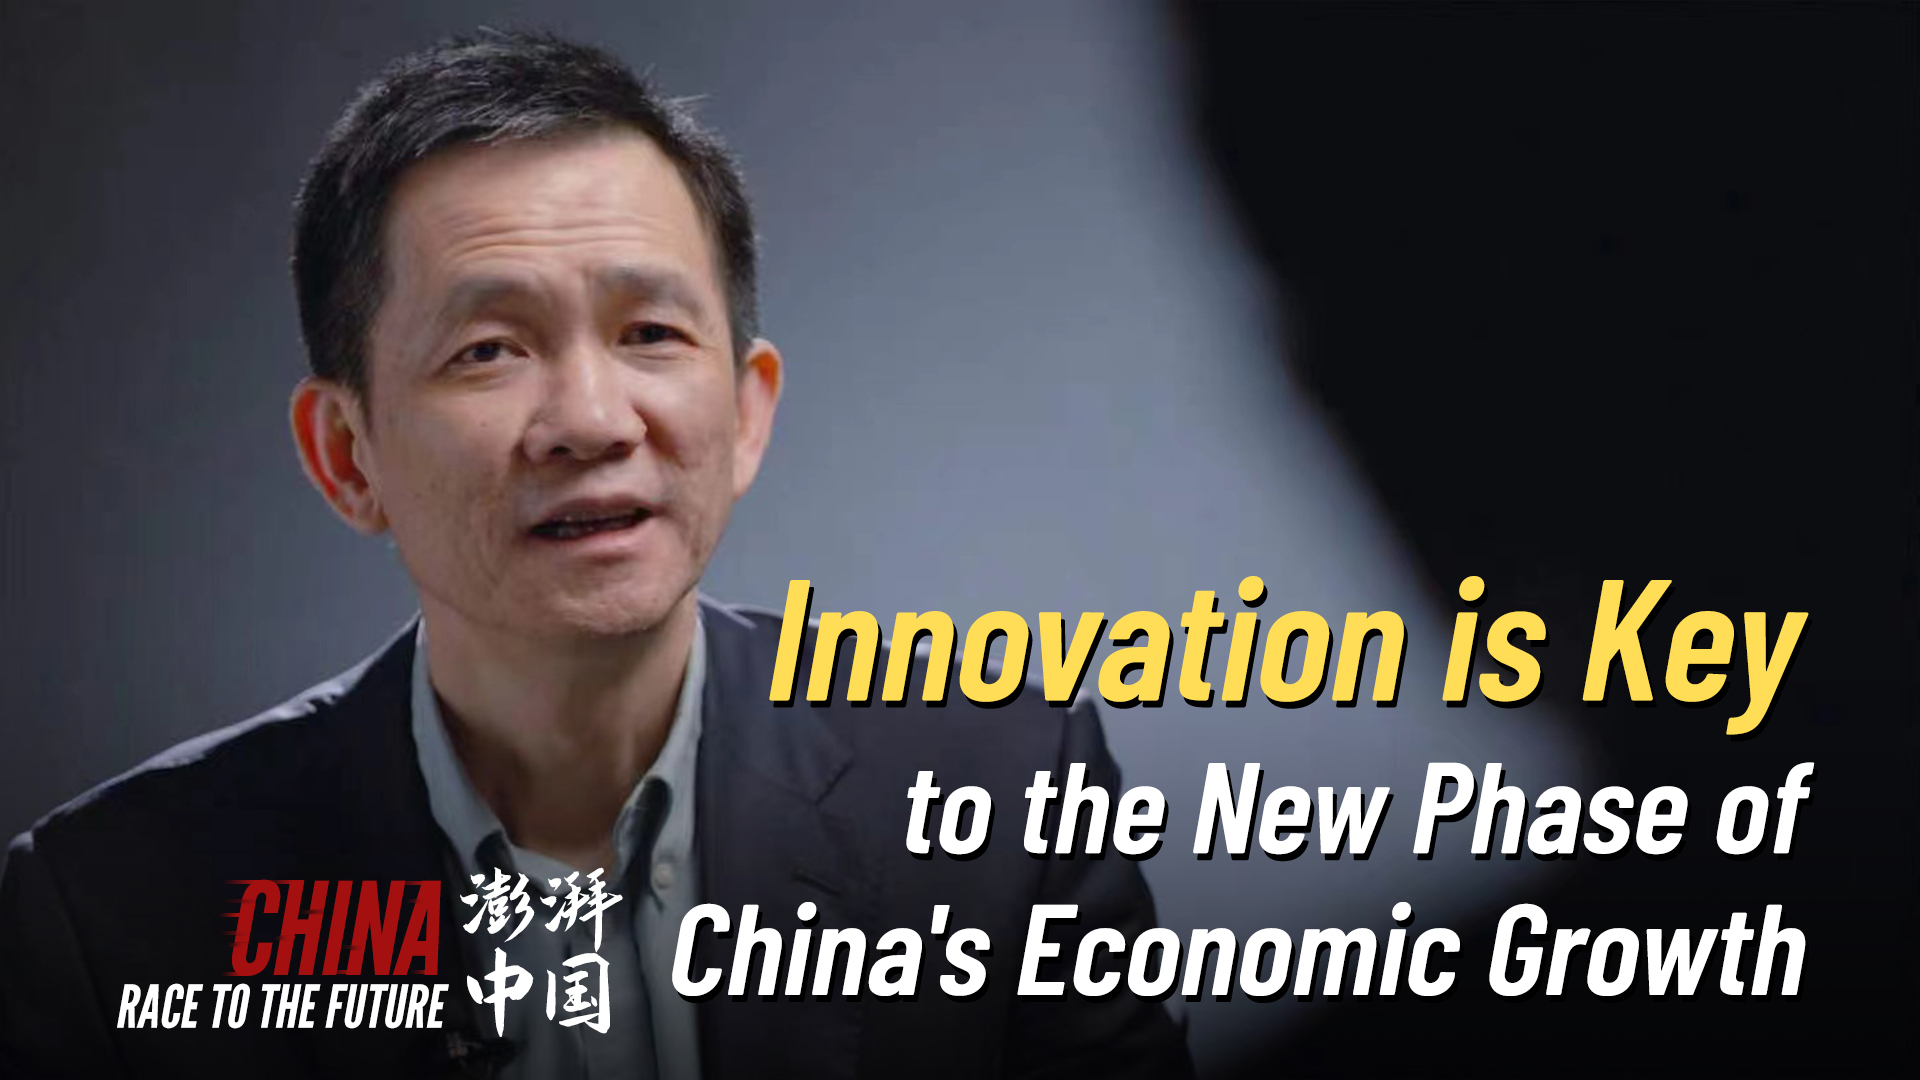 Innovation is Key to the New Phase of China's Economic Growth